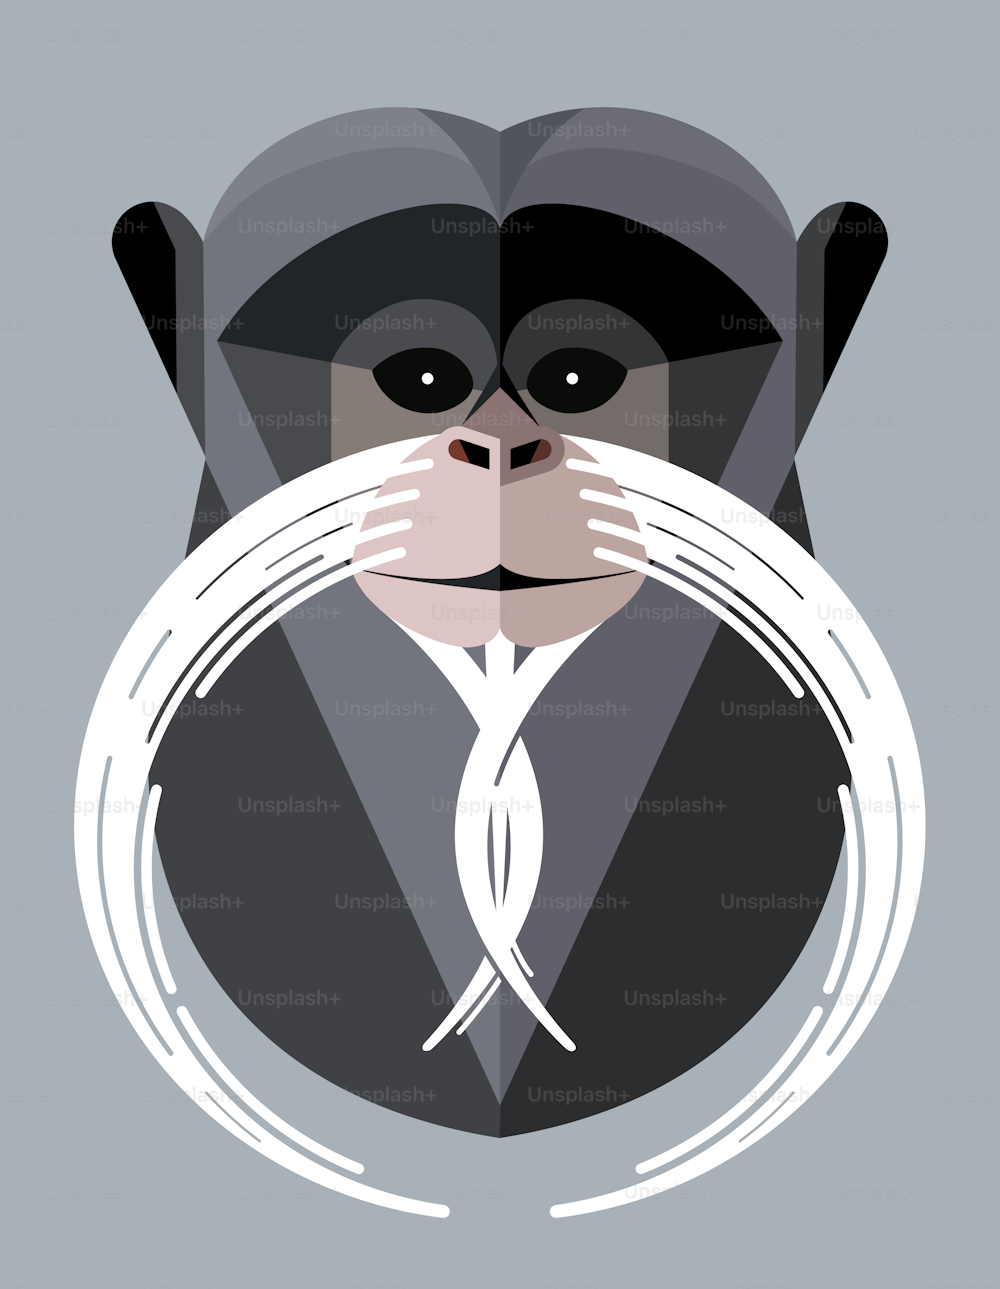 Monkey head emperor tamarin on a gray background, stylized vector image